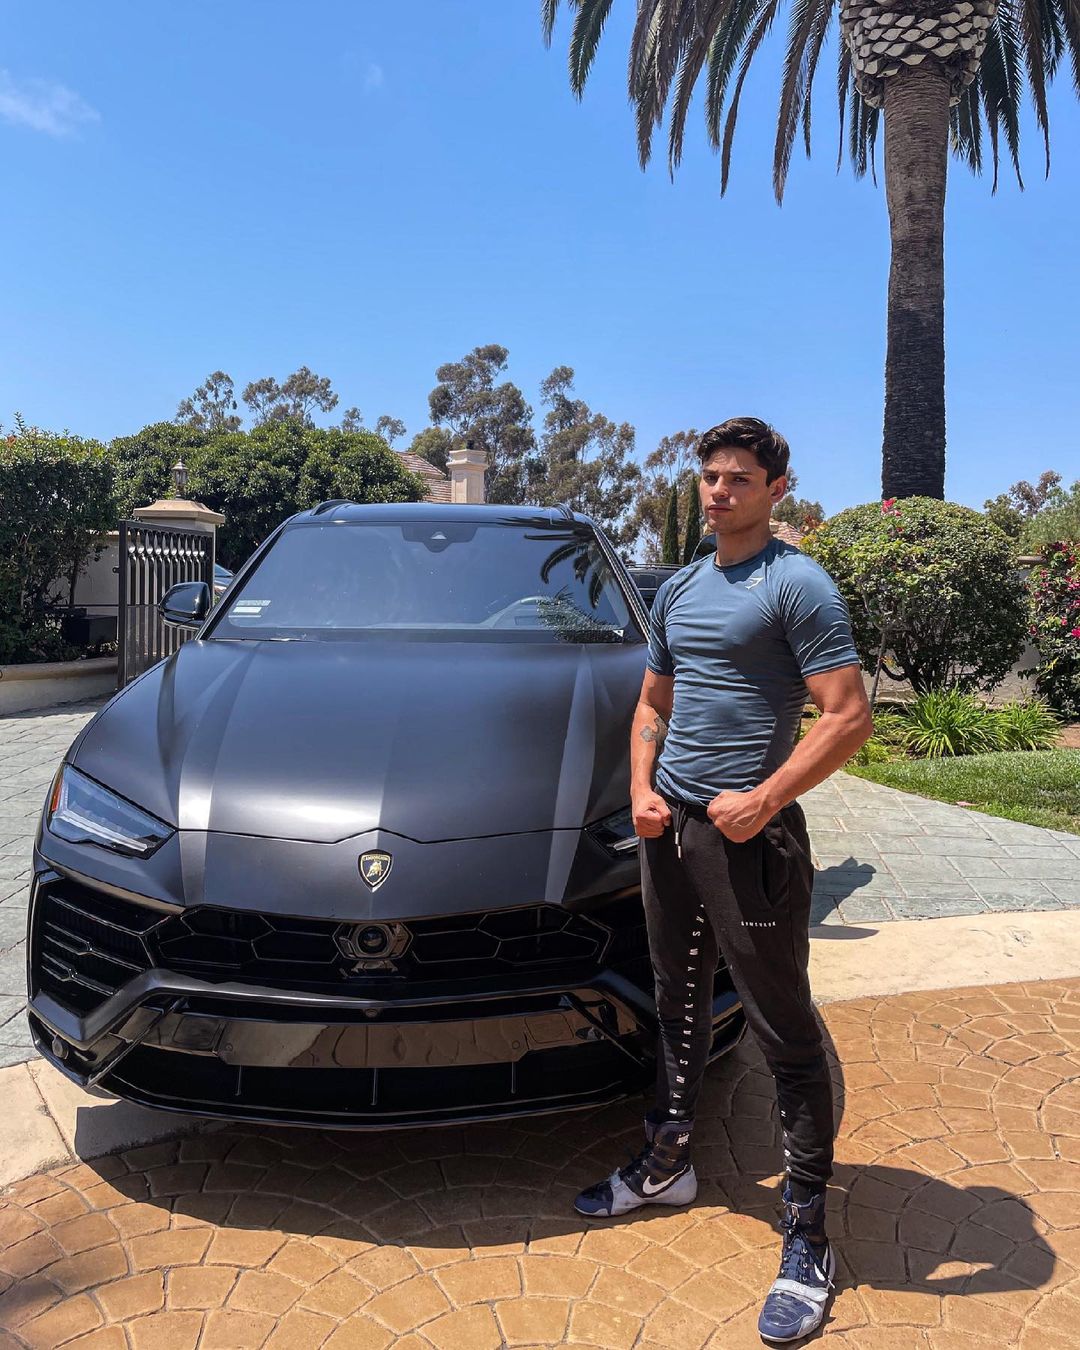 Ryan Garcia, unbeaten boxer, shows off his dramatic body transformation against Javier Fortuna in this glamorous life